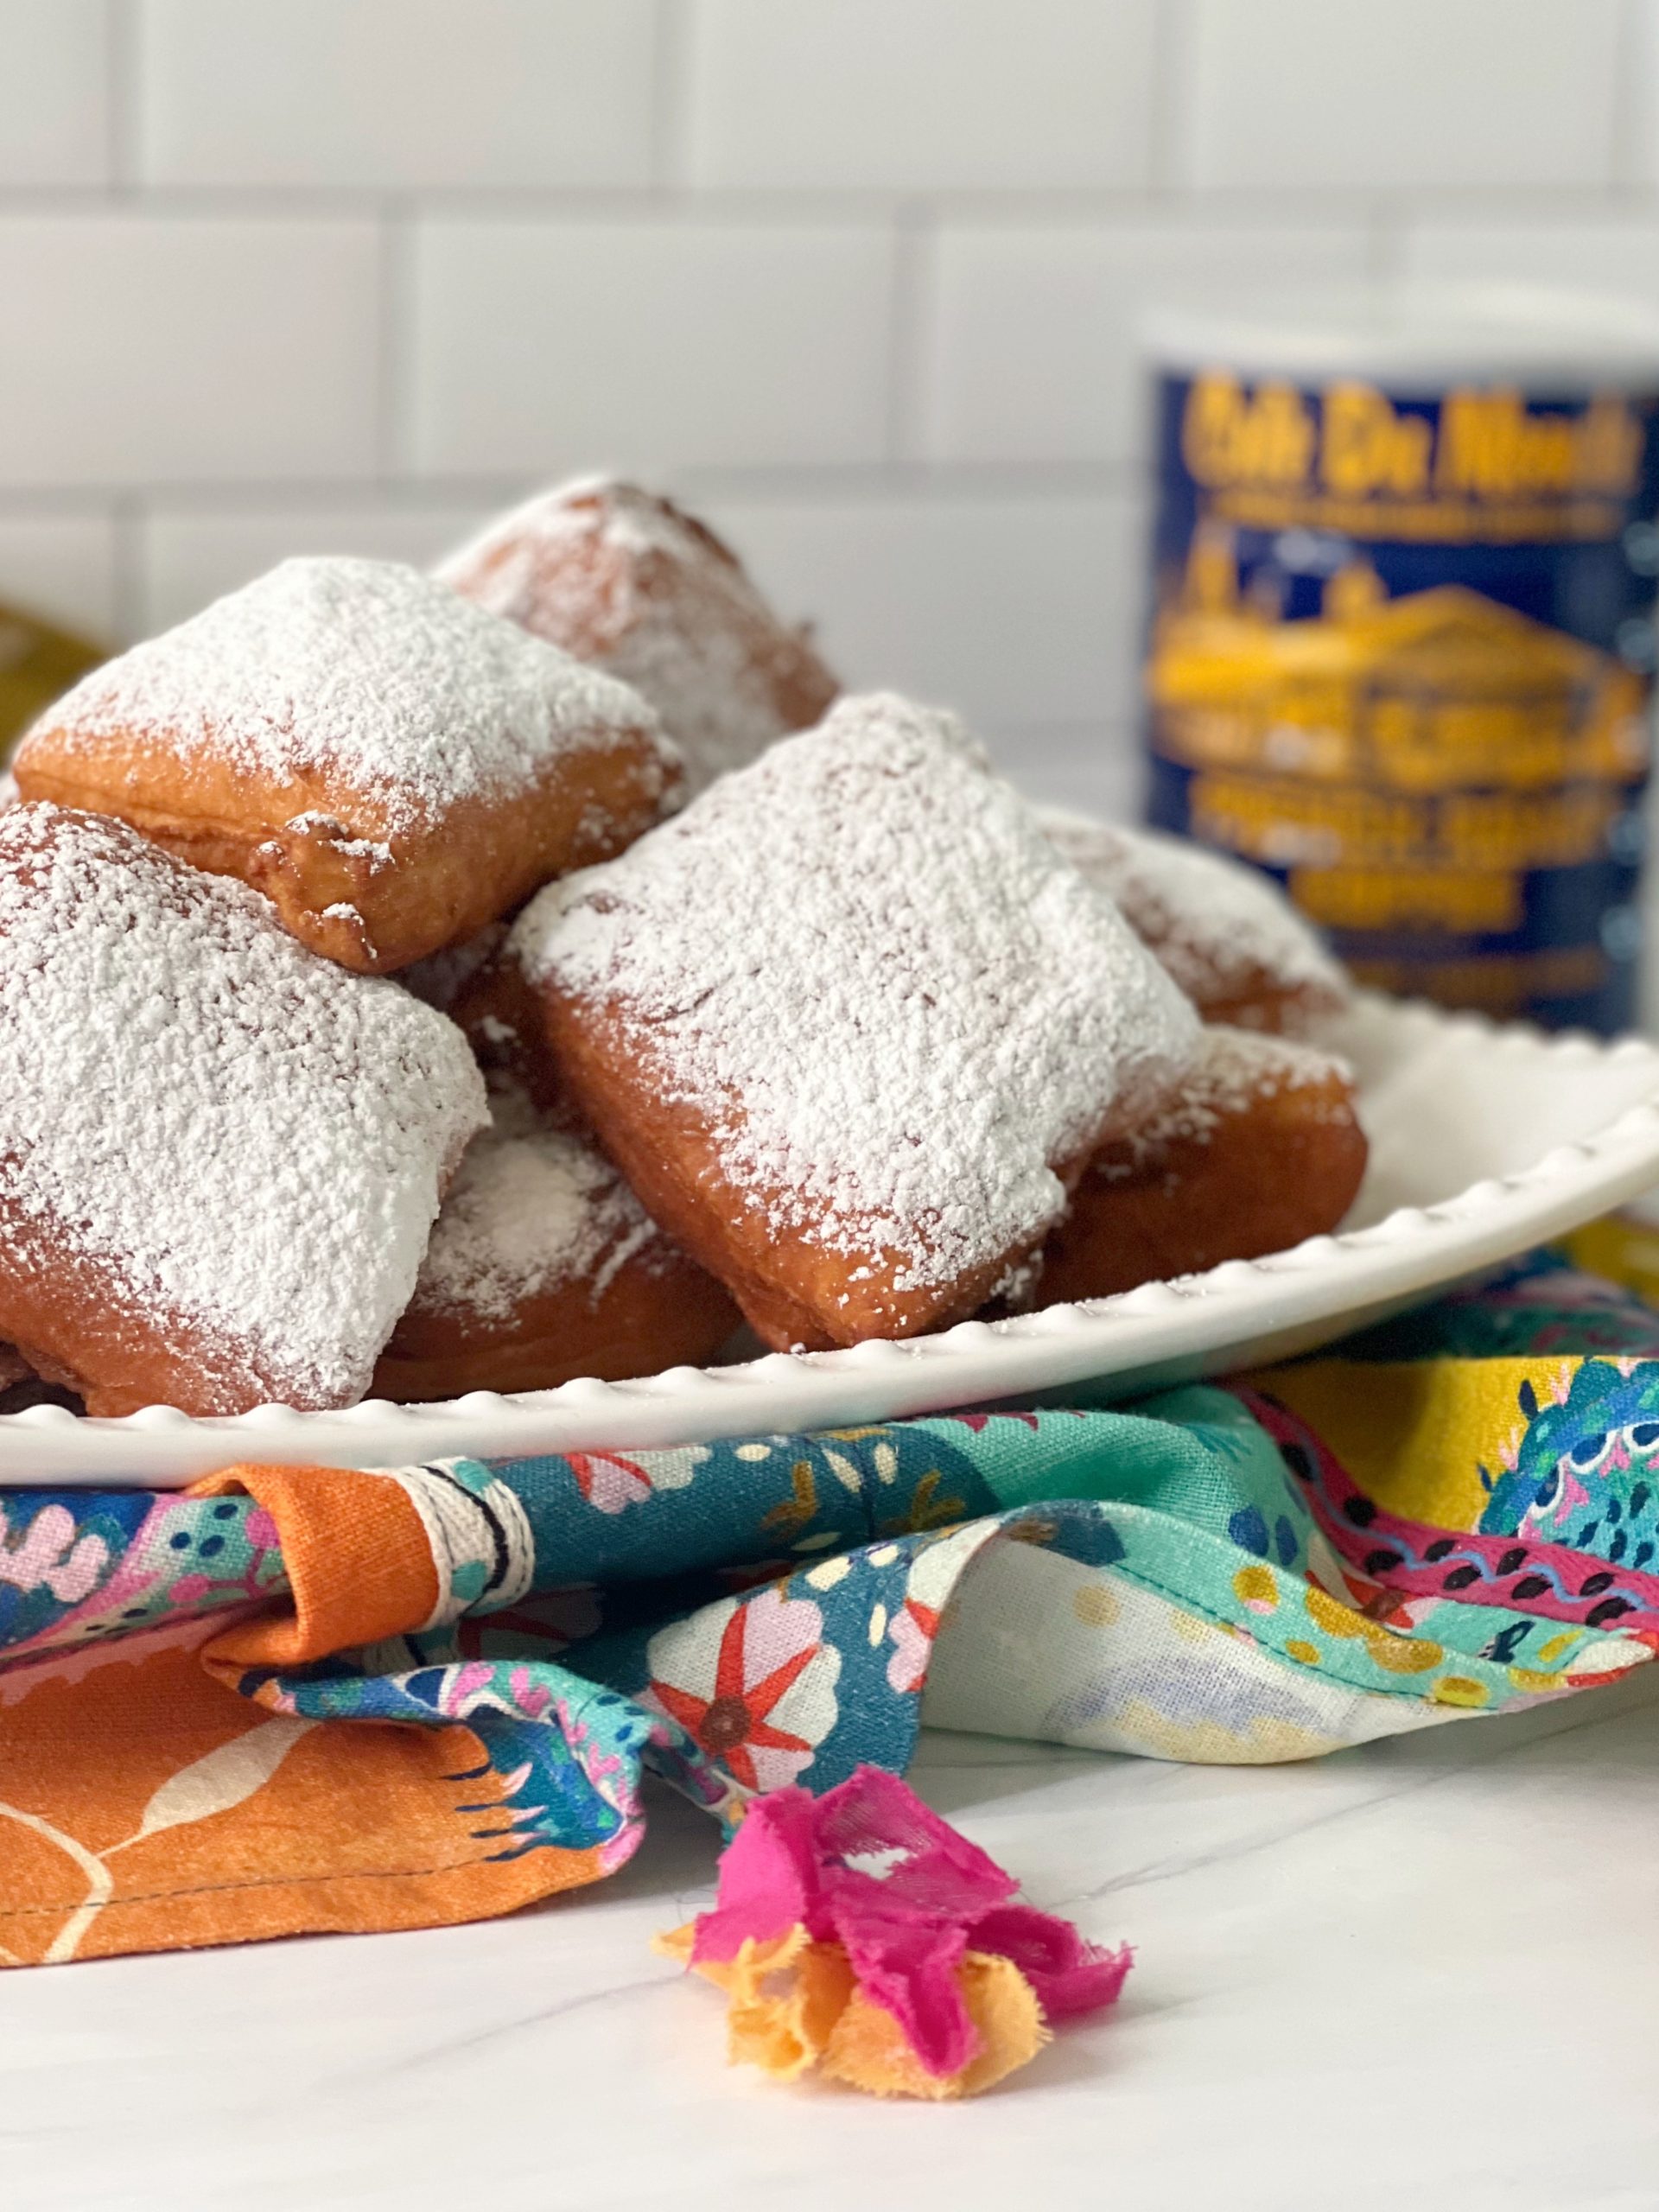 How to Make Classic New Orleans Beignets